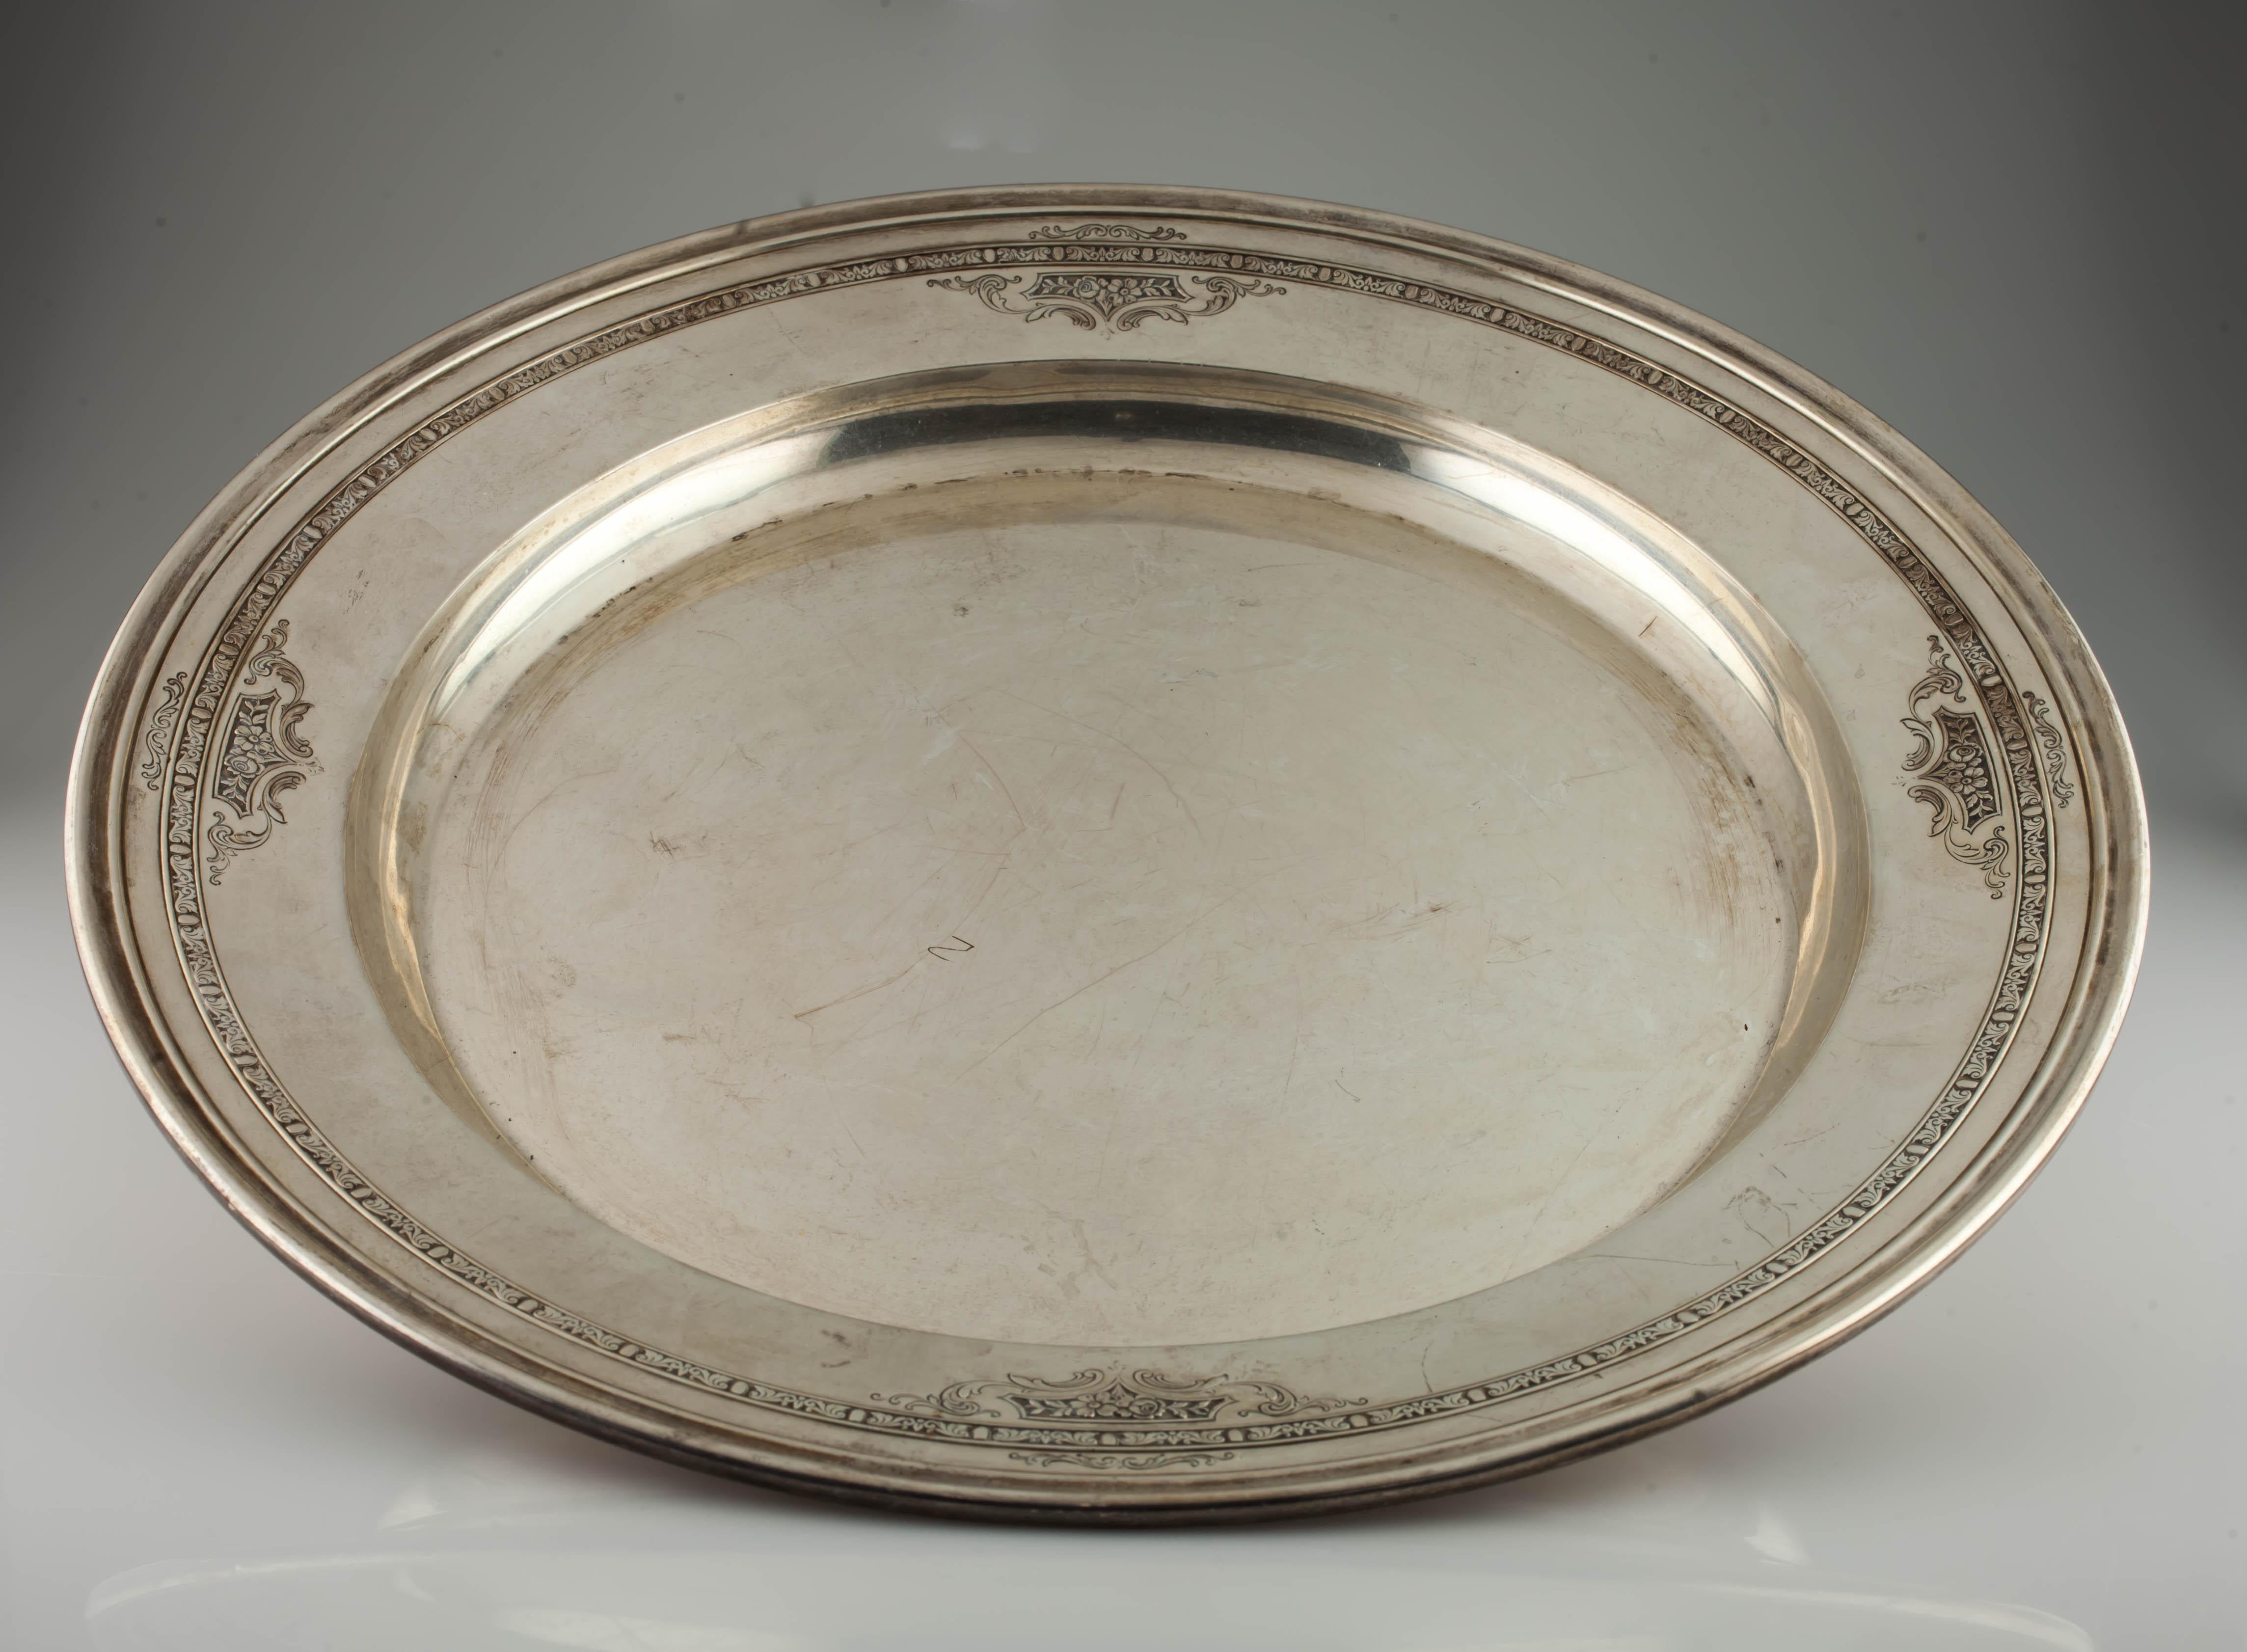 Modern Towle Lady Constance Sterling Silver Platter 66100 14.5